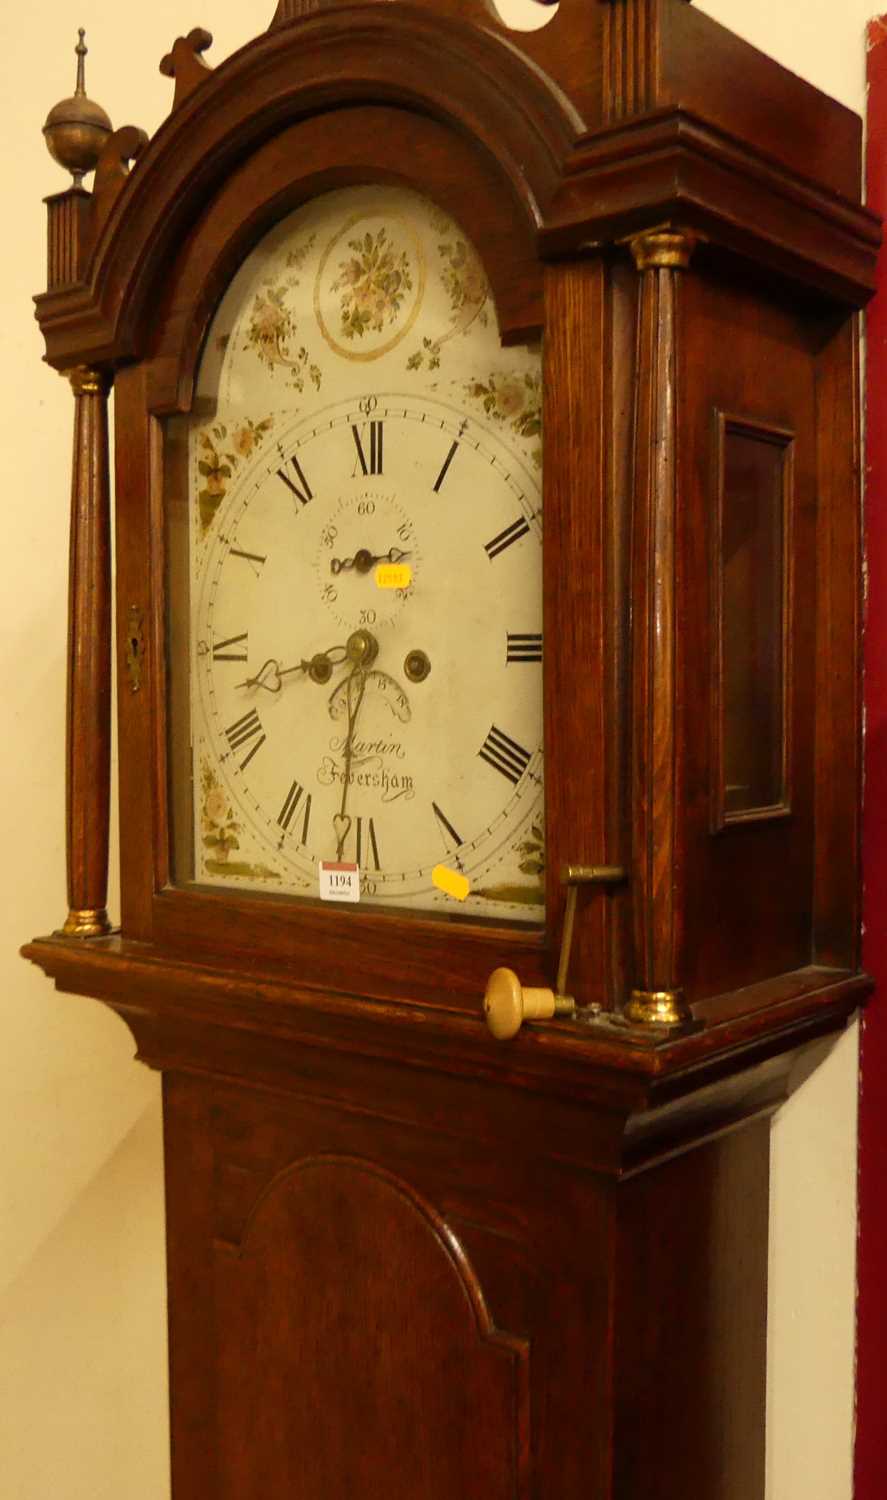 Martin of Feversham - early 19th century oak longcase clock, having a 12" painted arched dial,